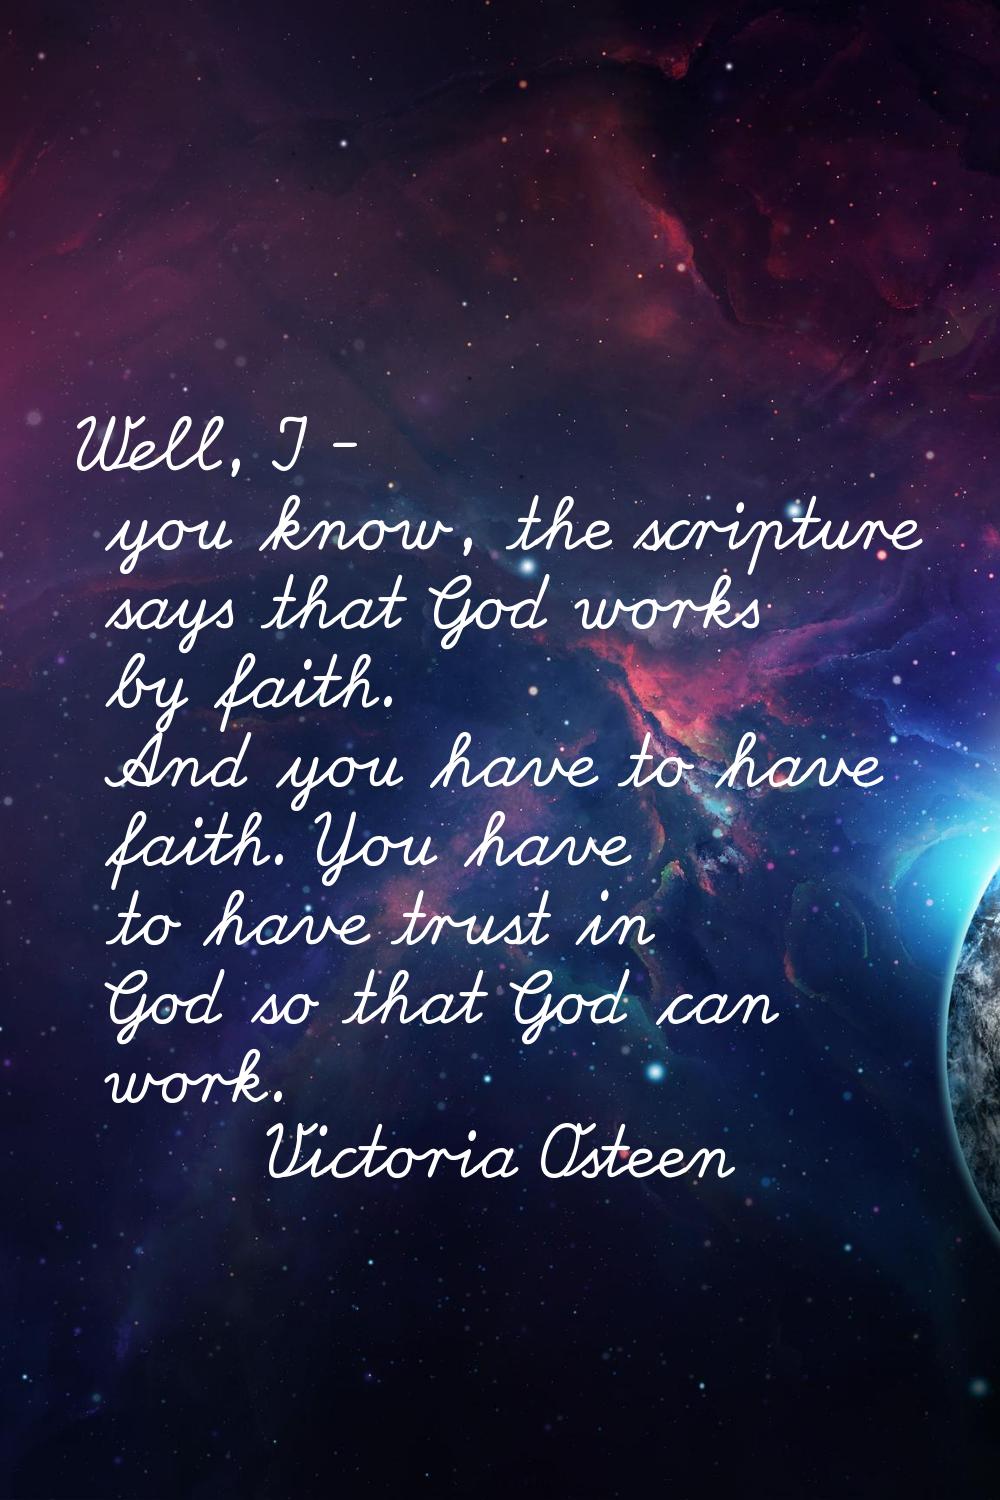 Well, I - you know, the scripture says that God works by faith. And you have to have faith. You hav